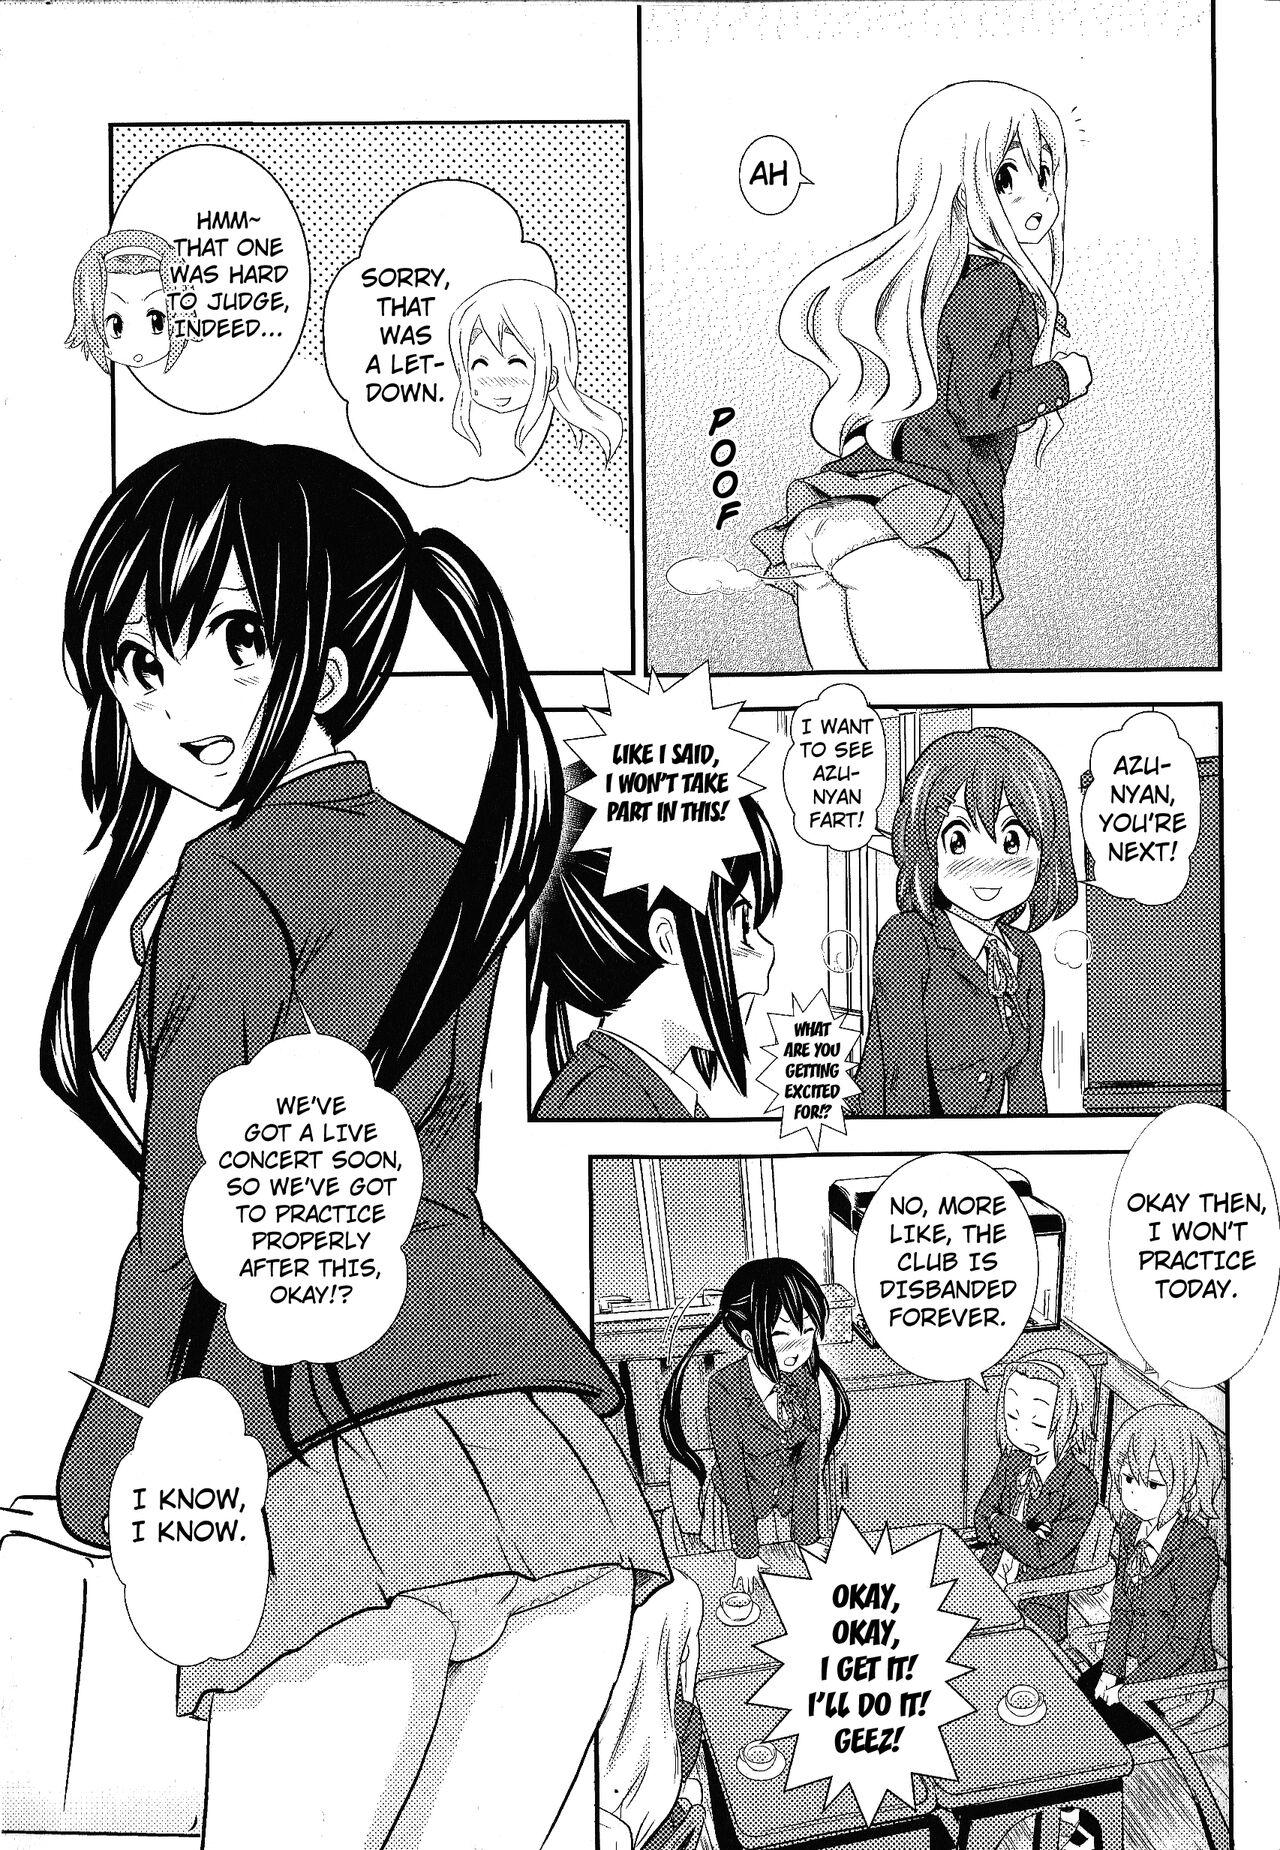 Asian Houkago Unchi Time Best | Best of After School Poop Time - K on Calle - Page 4